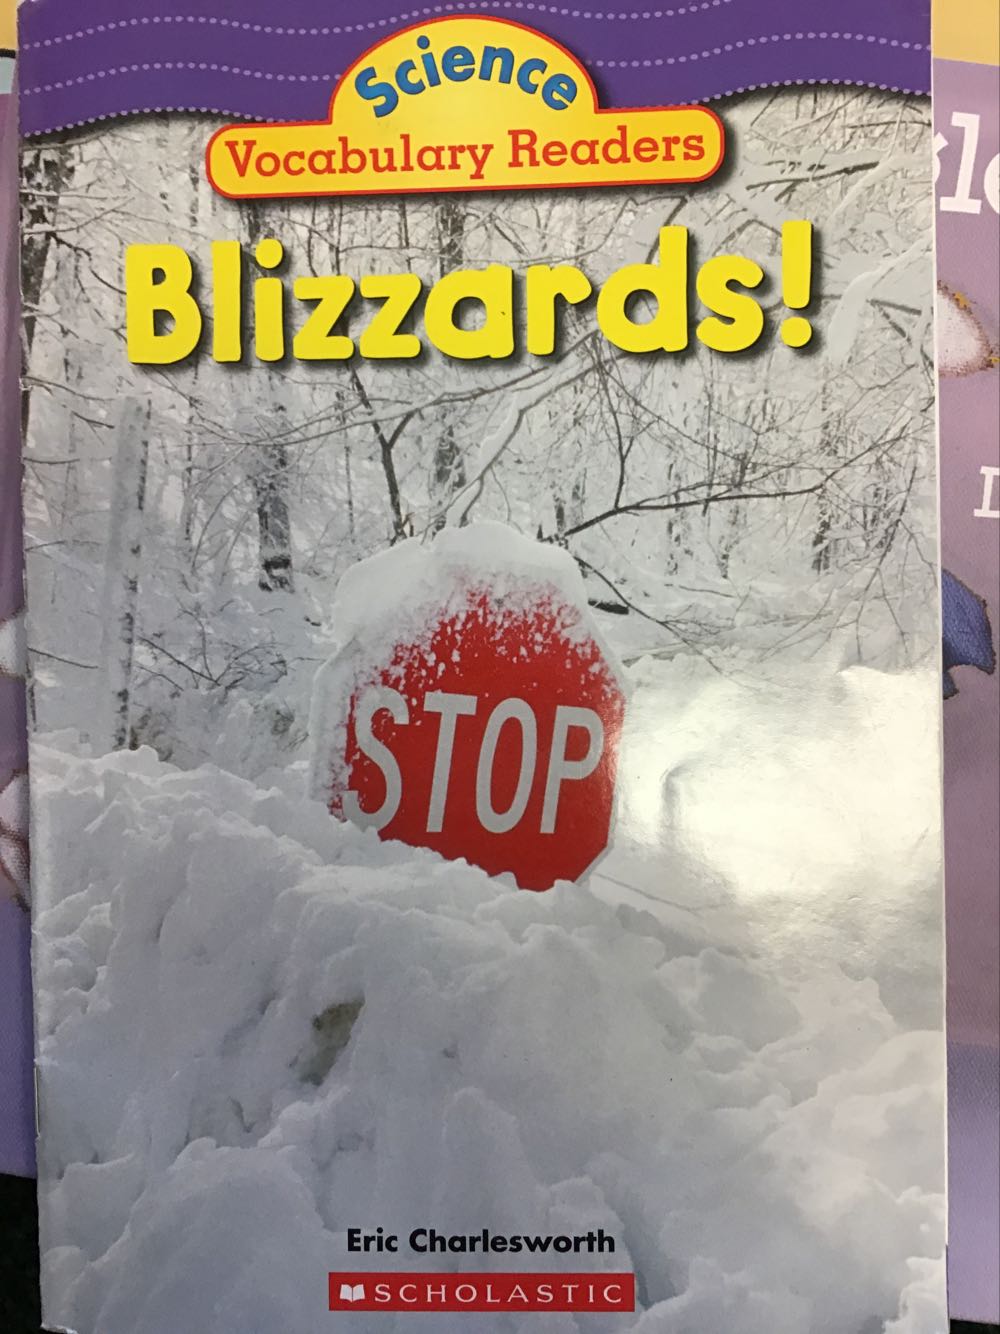 Blizzards! - Incorporated Scholastic (Scholastic Inc. - Paperback) book collectible [Barcode 9780439876421] - Main Image 3